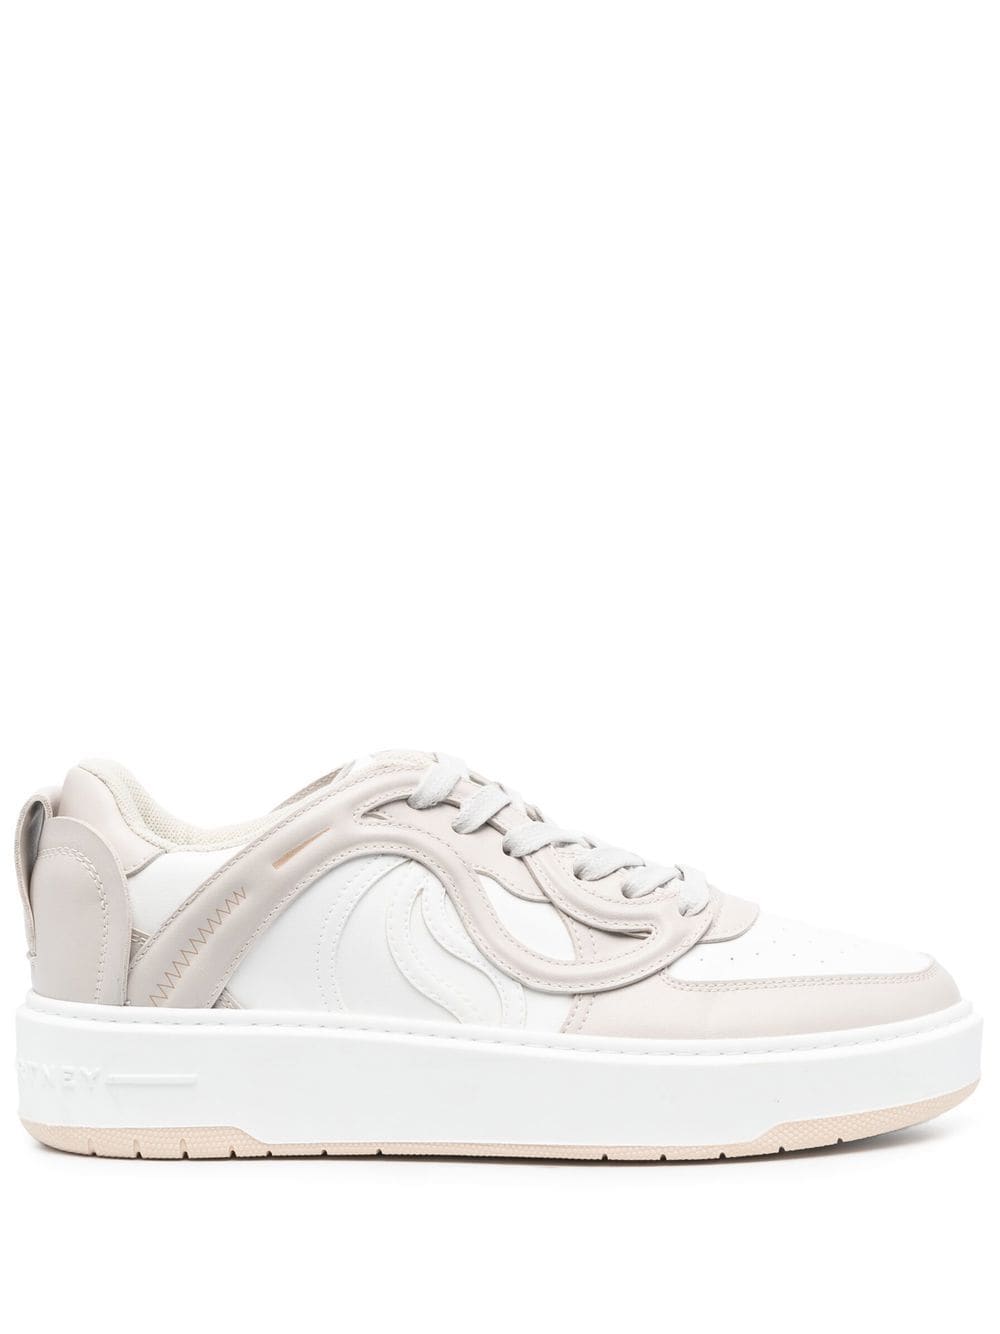 Stella McCartney - S-Wave 1 low-top sneakers - women - Recycled Polyester/Polyamide/Fabric/Rubber - 35 - White